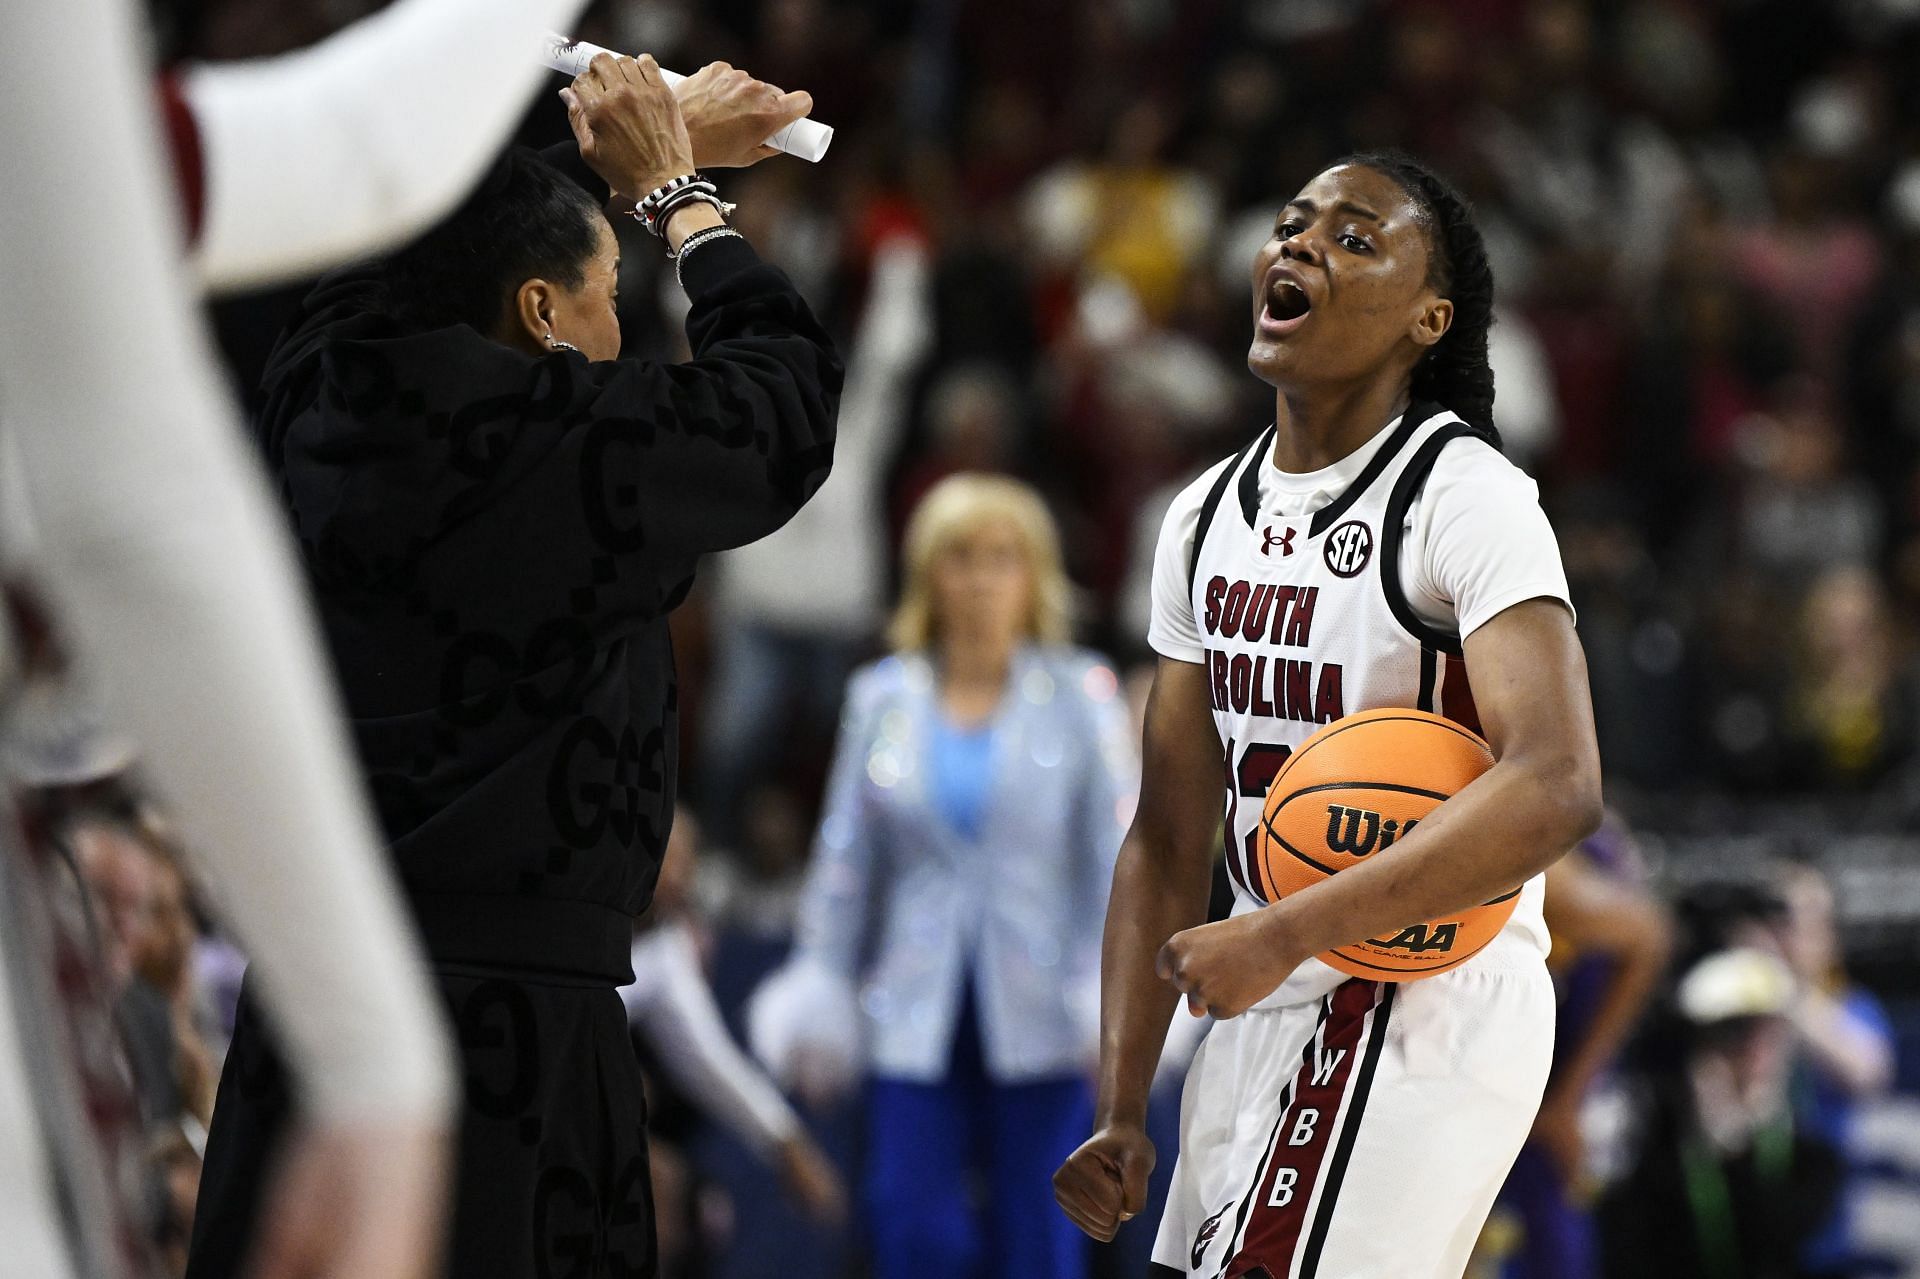 MiLaysia Fulwiley turned a lot of heads in her first year with South Carolina.